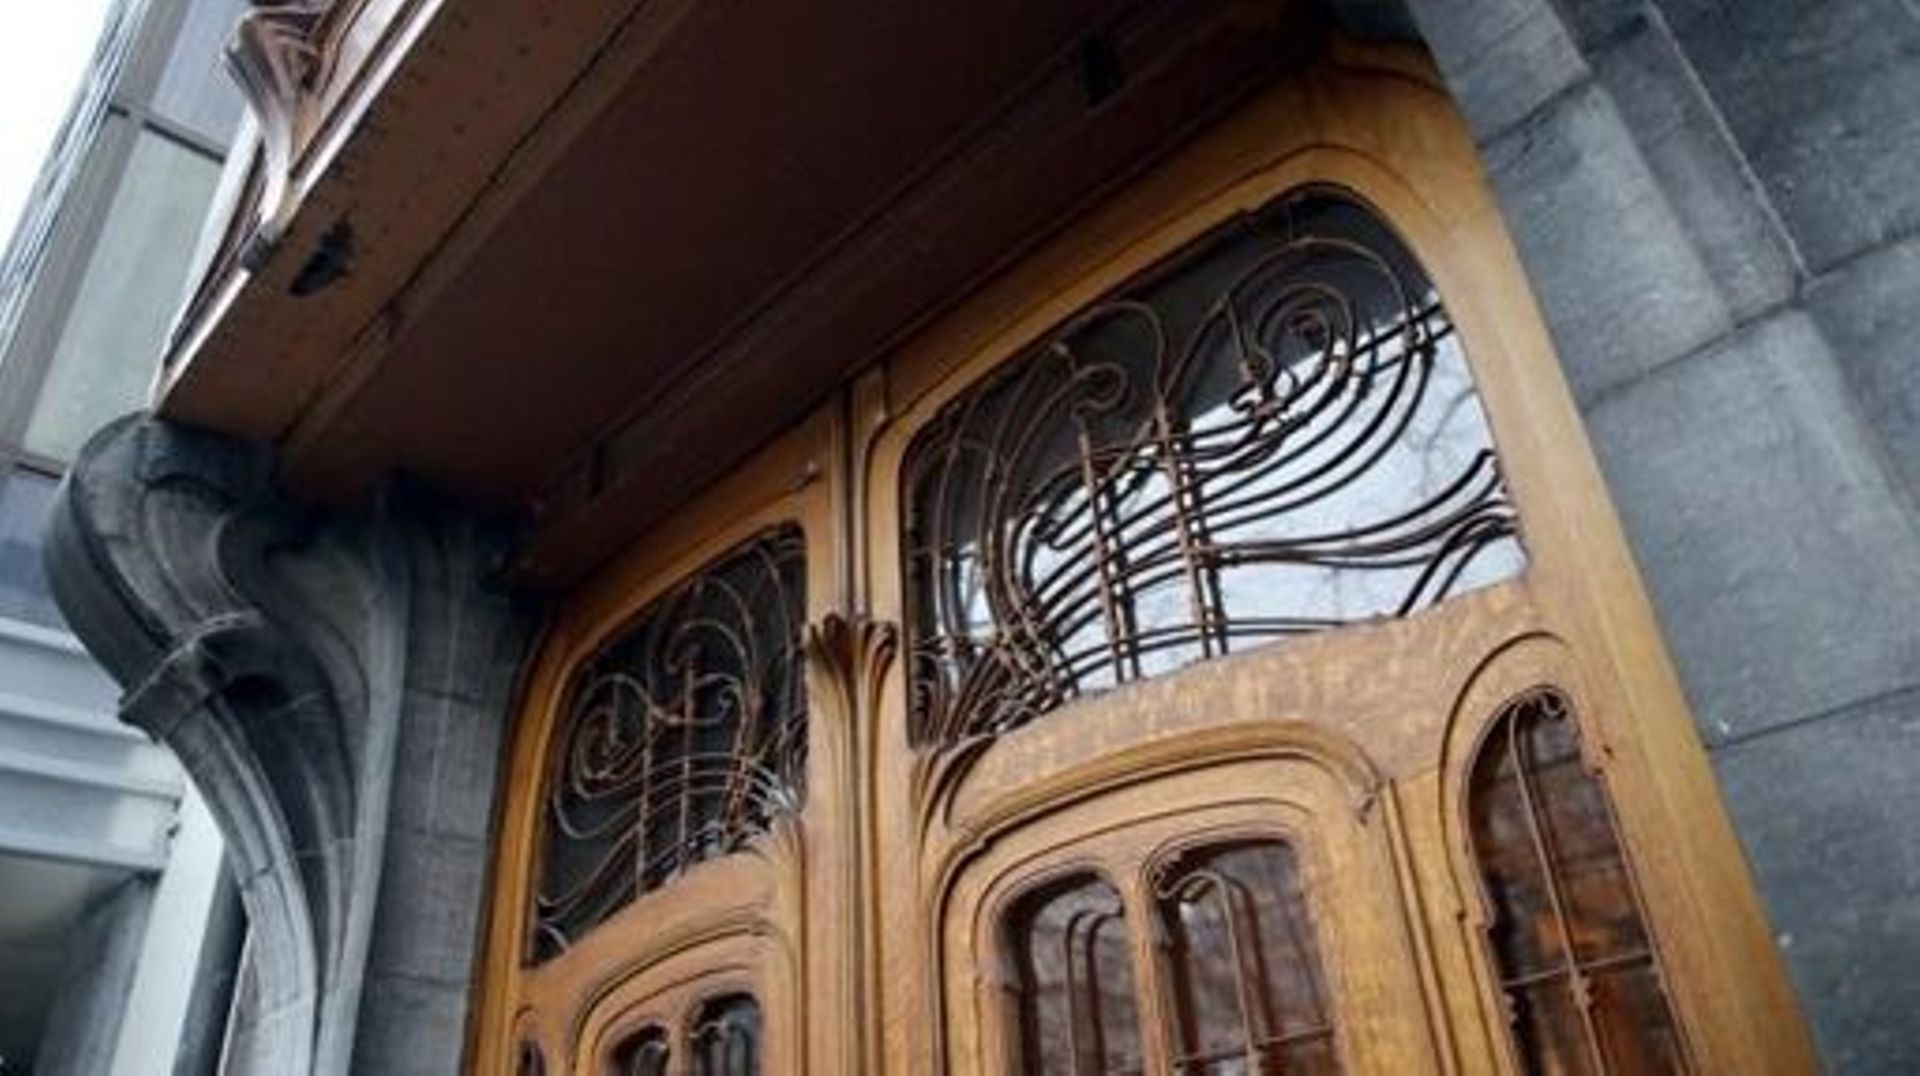 View of the entrance of the Hotel Solvay, an Art Nouveau house designed by Victor Horta, in Brussels, on January 27, 2021. Still owned by the Wittamer family, this Art Nouveau masterpiece now opens to the public 2 days a week following a public-private pa